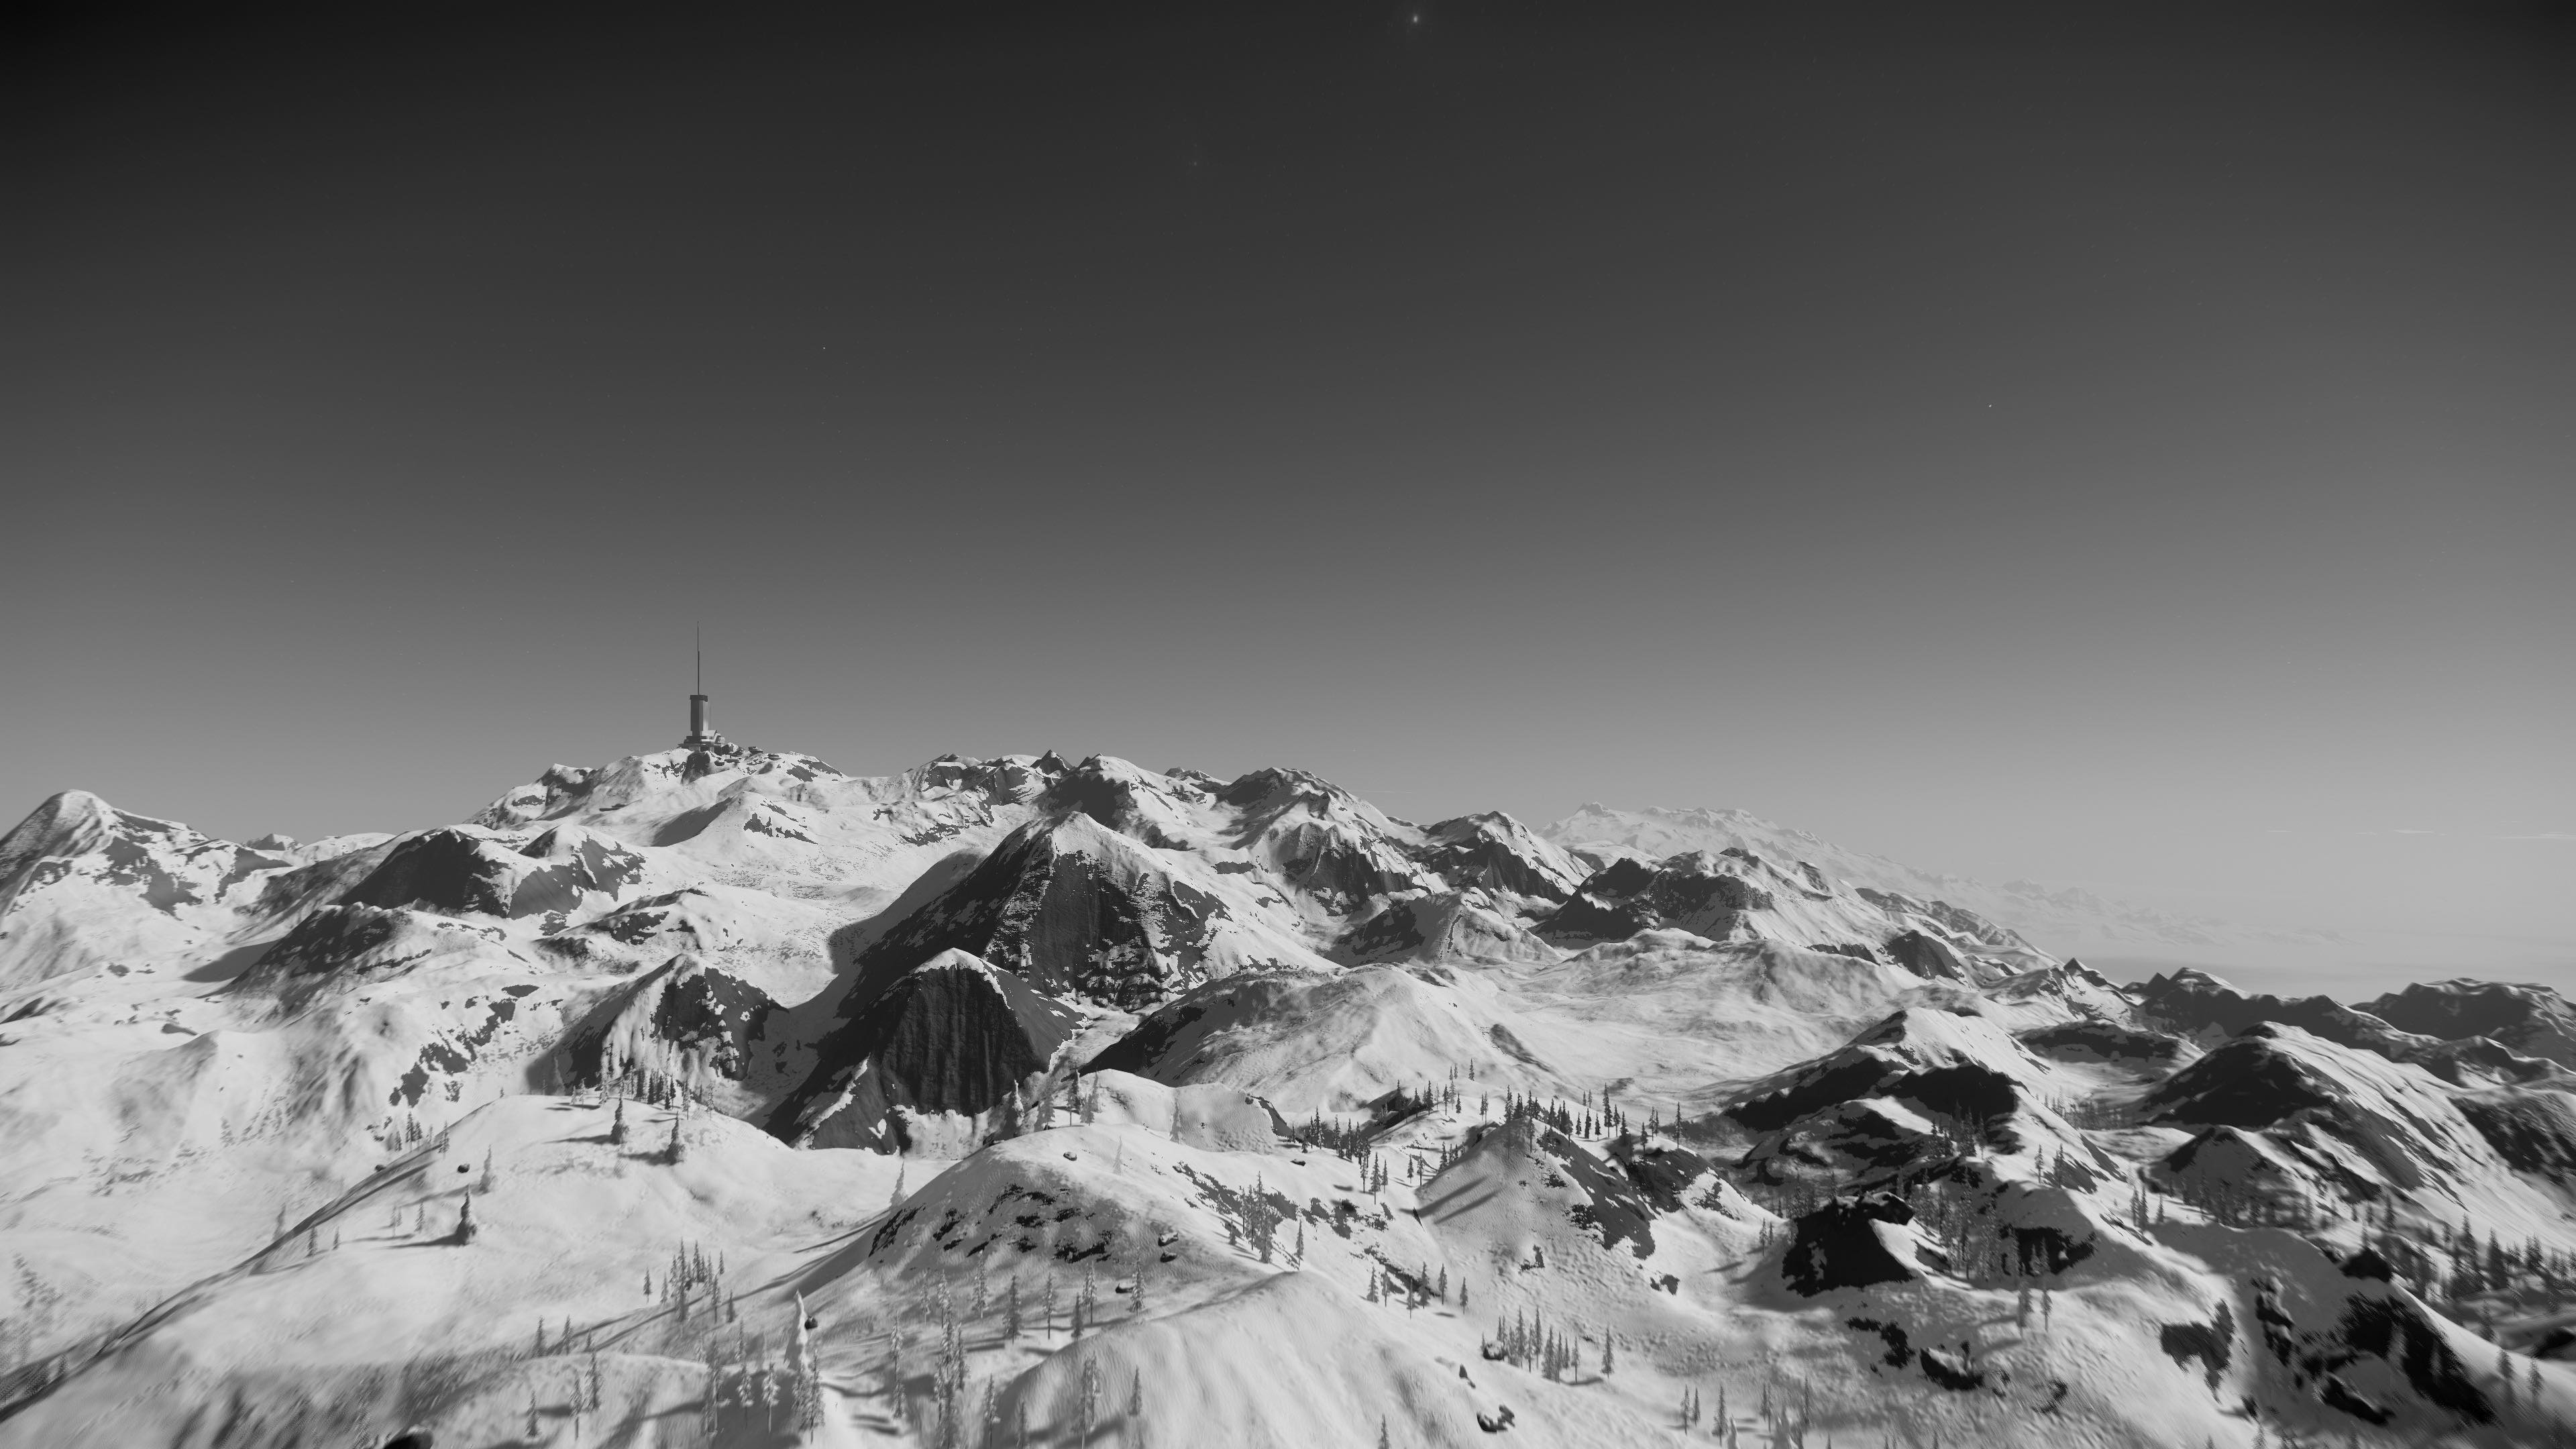 Background image of microTech snowy mountains